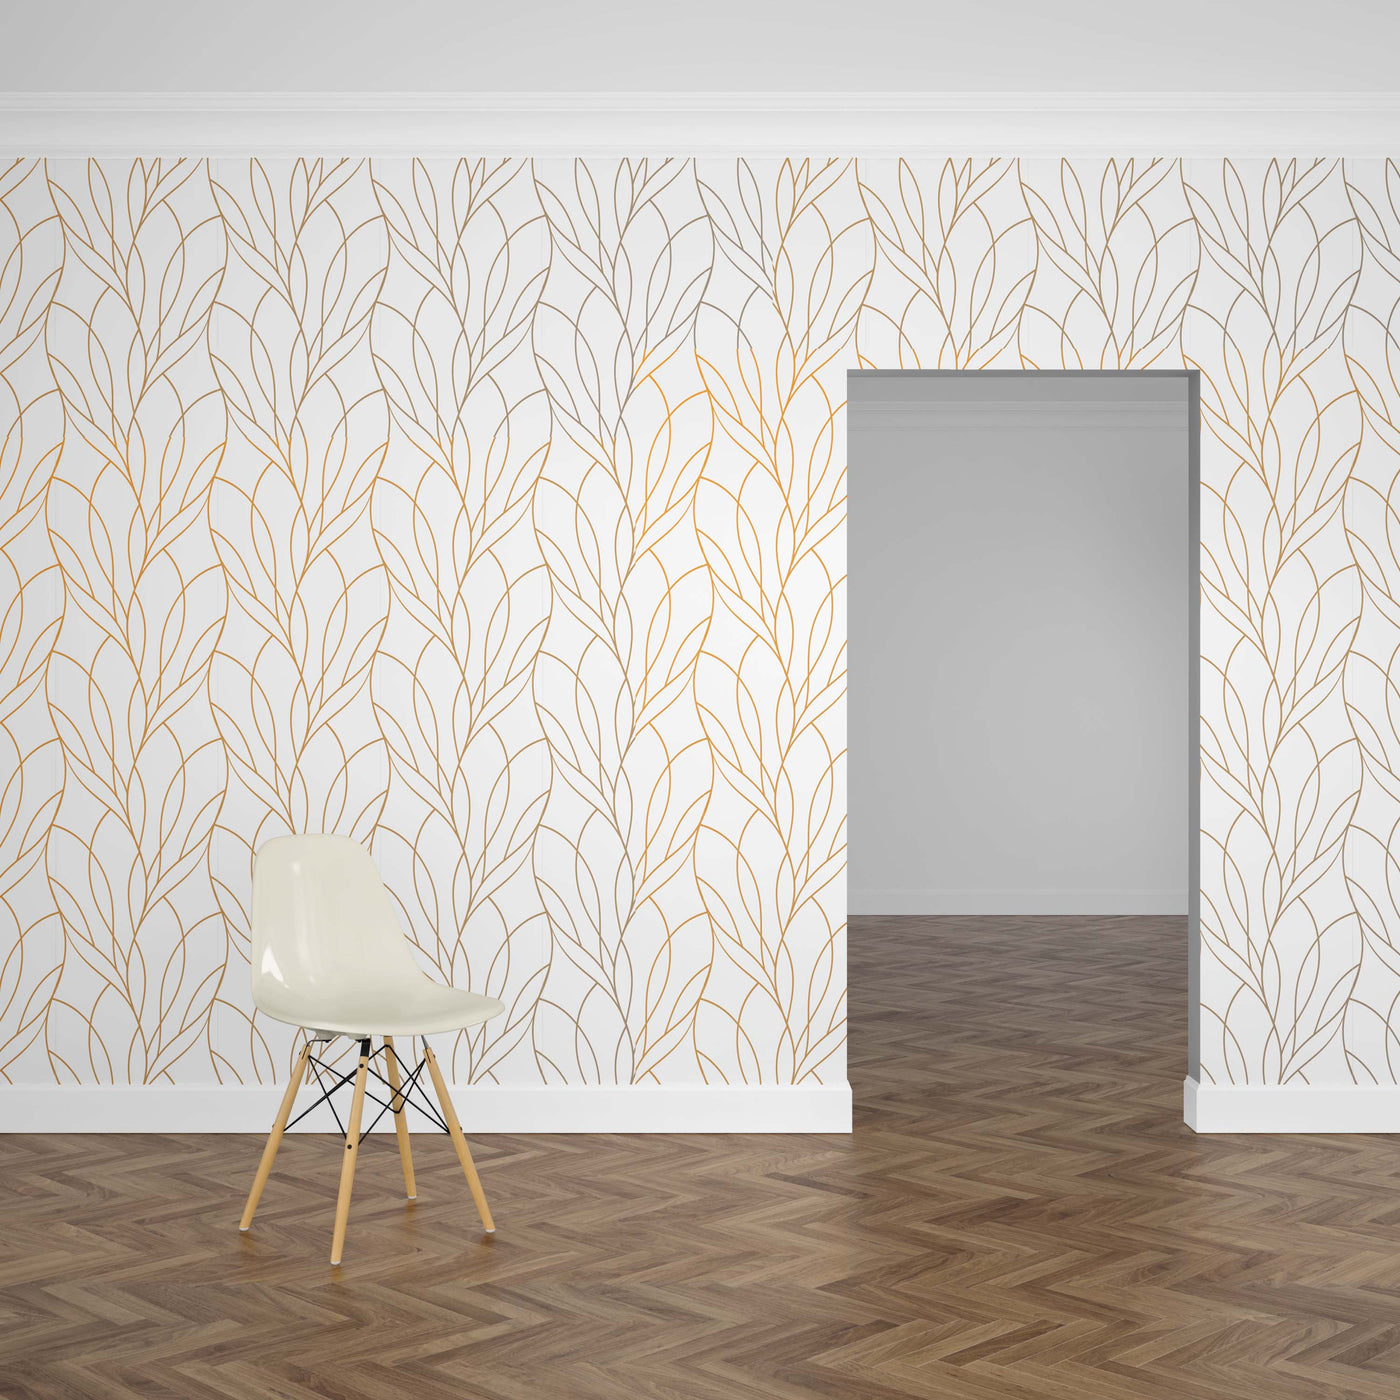 Gold Leaf Abstraction Mural Wallpaper (m²)-Wall Decor-ABSTRACT WALLPAPERS, DESIGN WALLPAPERS, MURALS, MURALS / WALLPAPERS, NATURE WALL ART, NON-WOVEN WALLPAPER-Forest Homes-Nature inspired decor-Nature decor